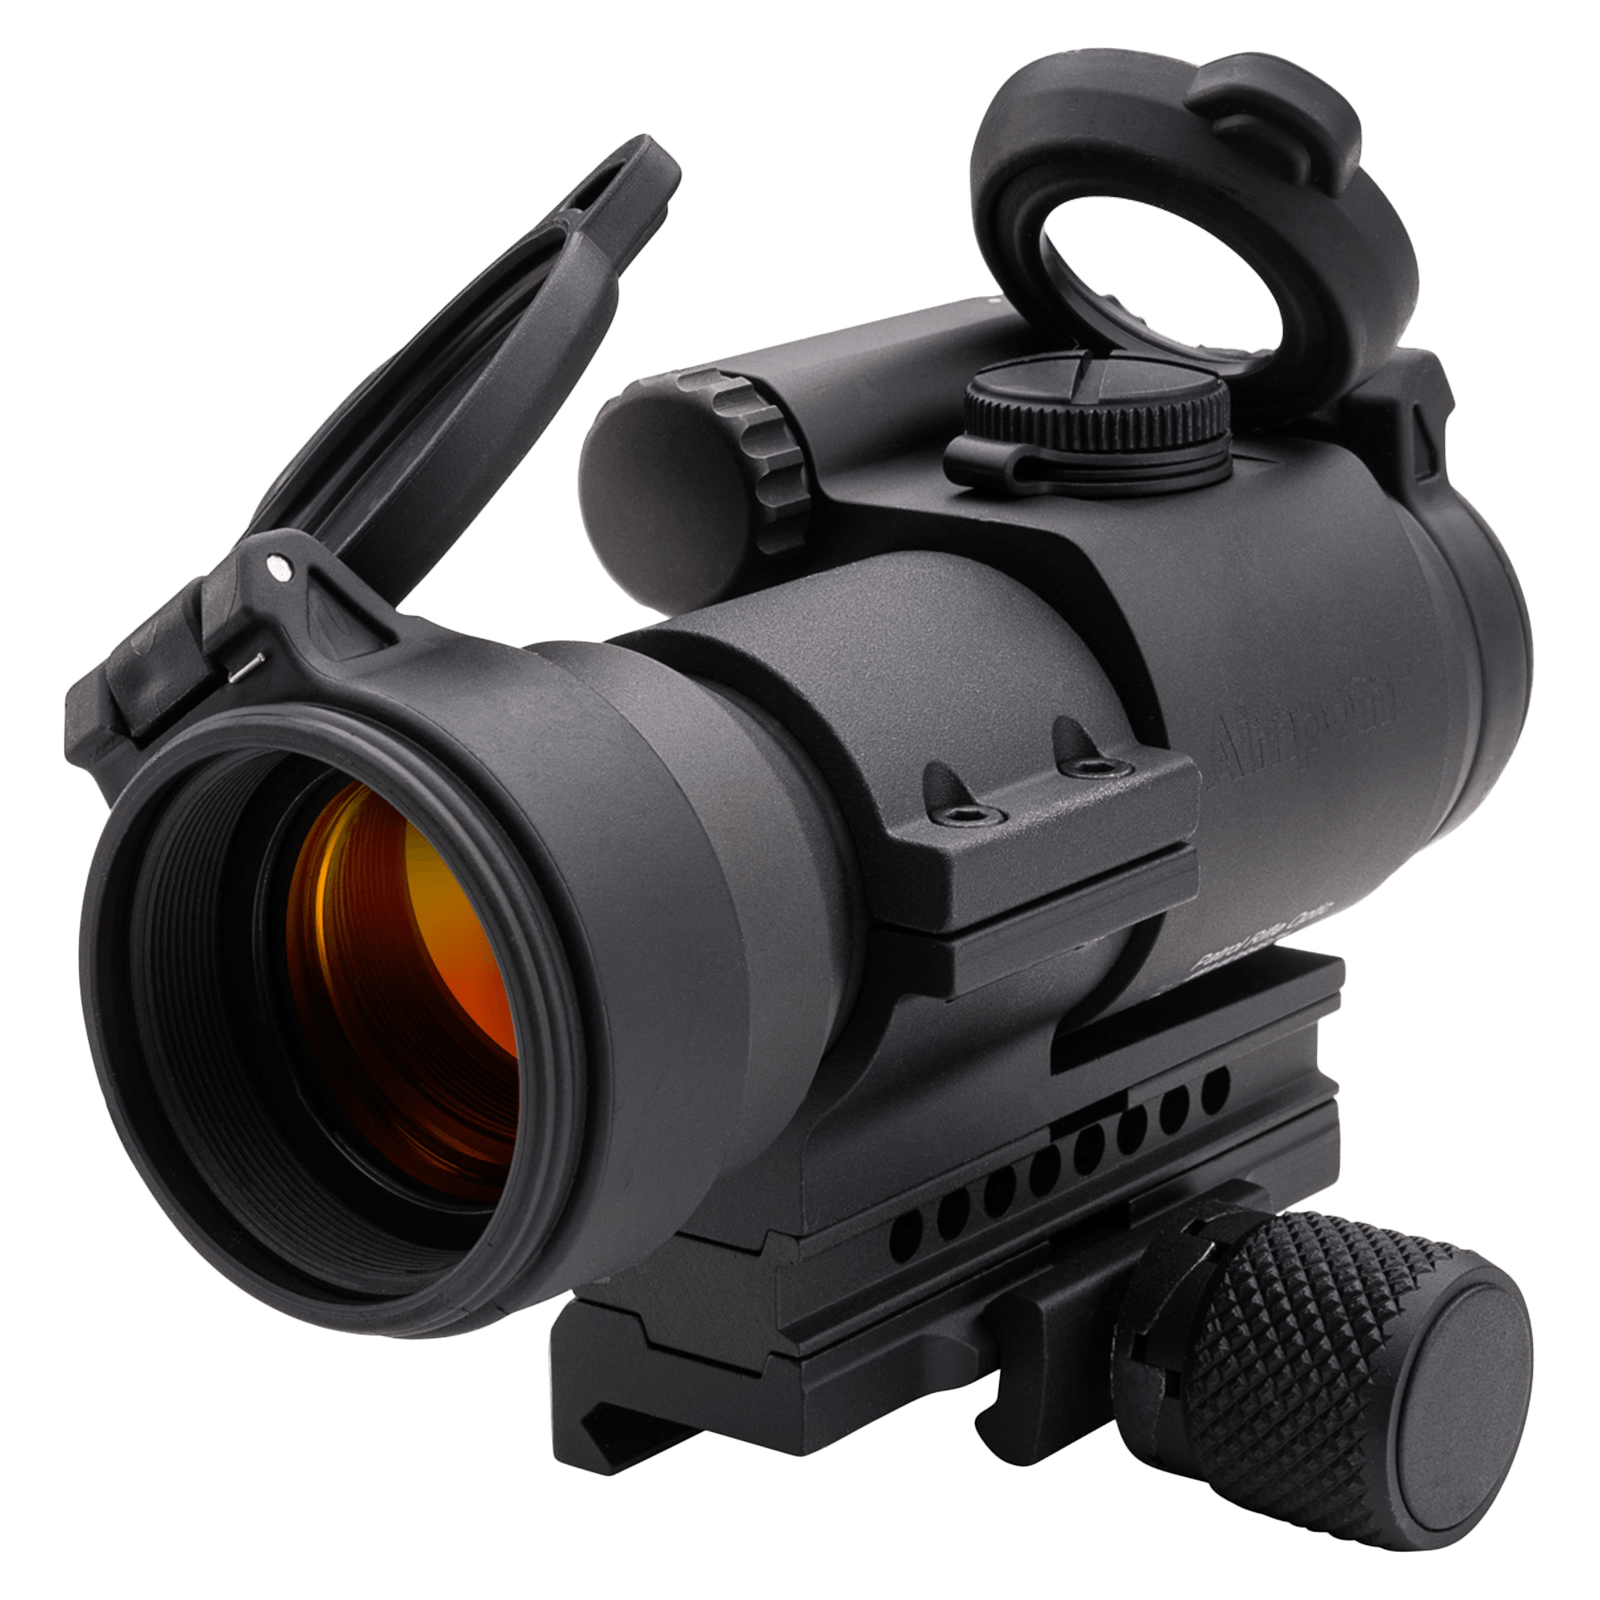 Aimpoint Patrol Rifle Optic (PRO) Red Dot Reflex Sight with QRP2 Mount (12841)